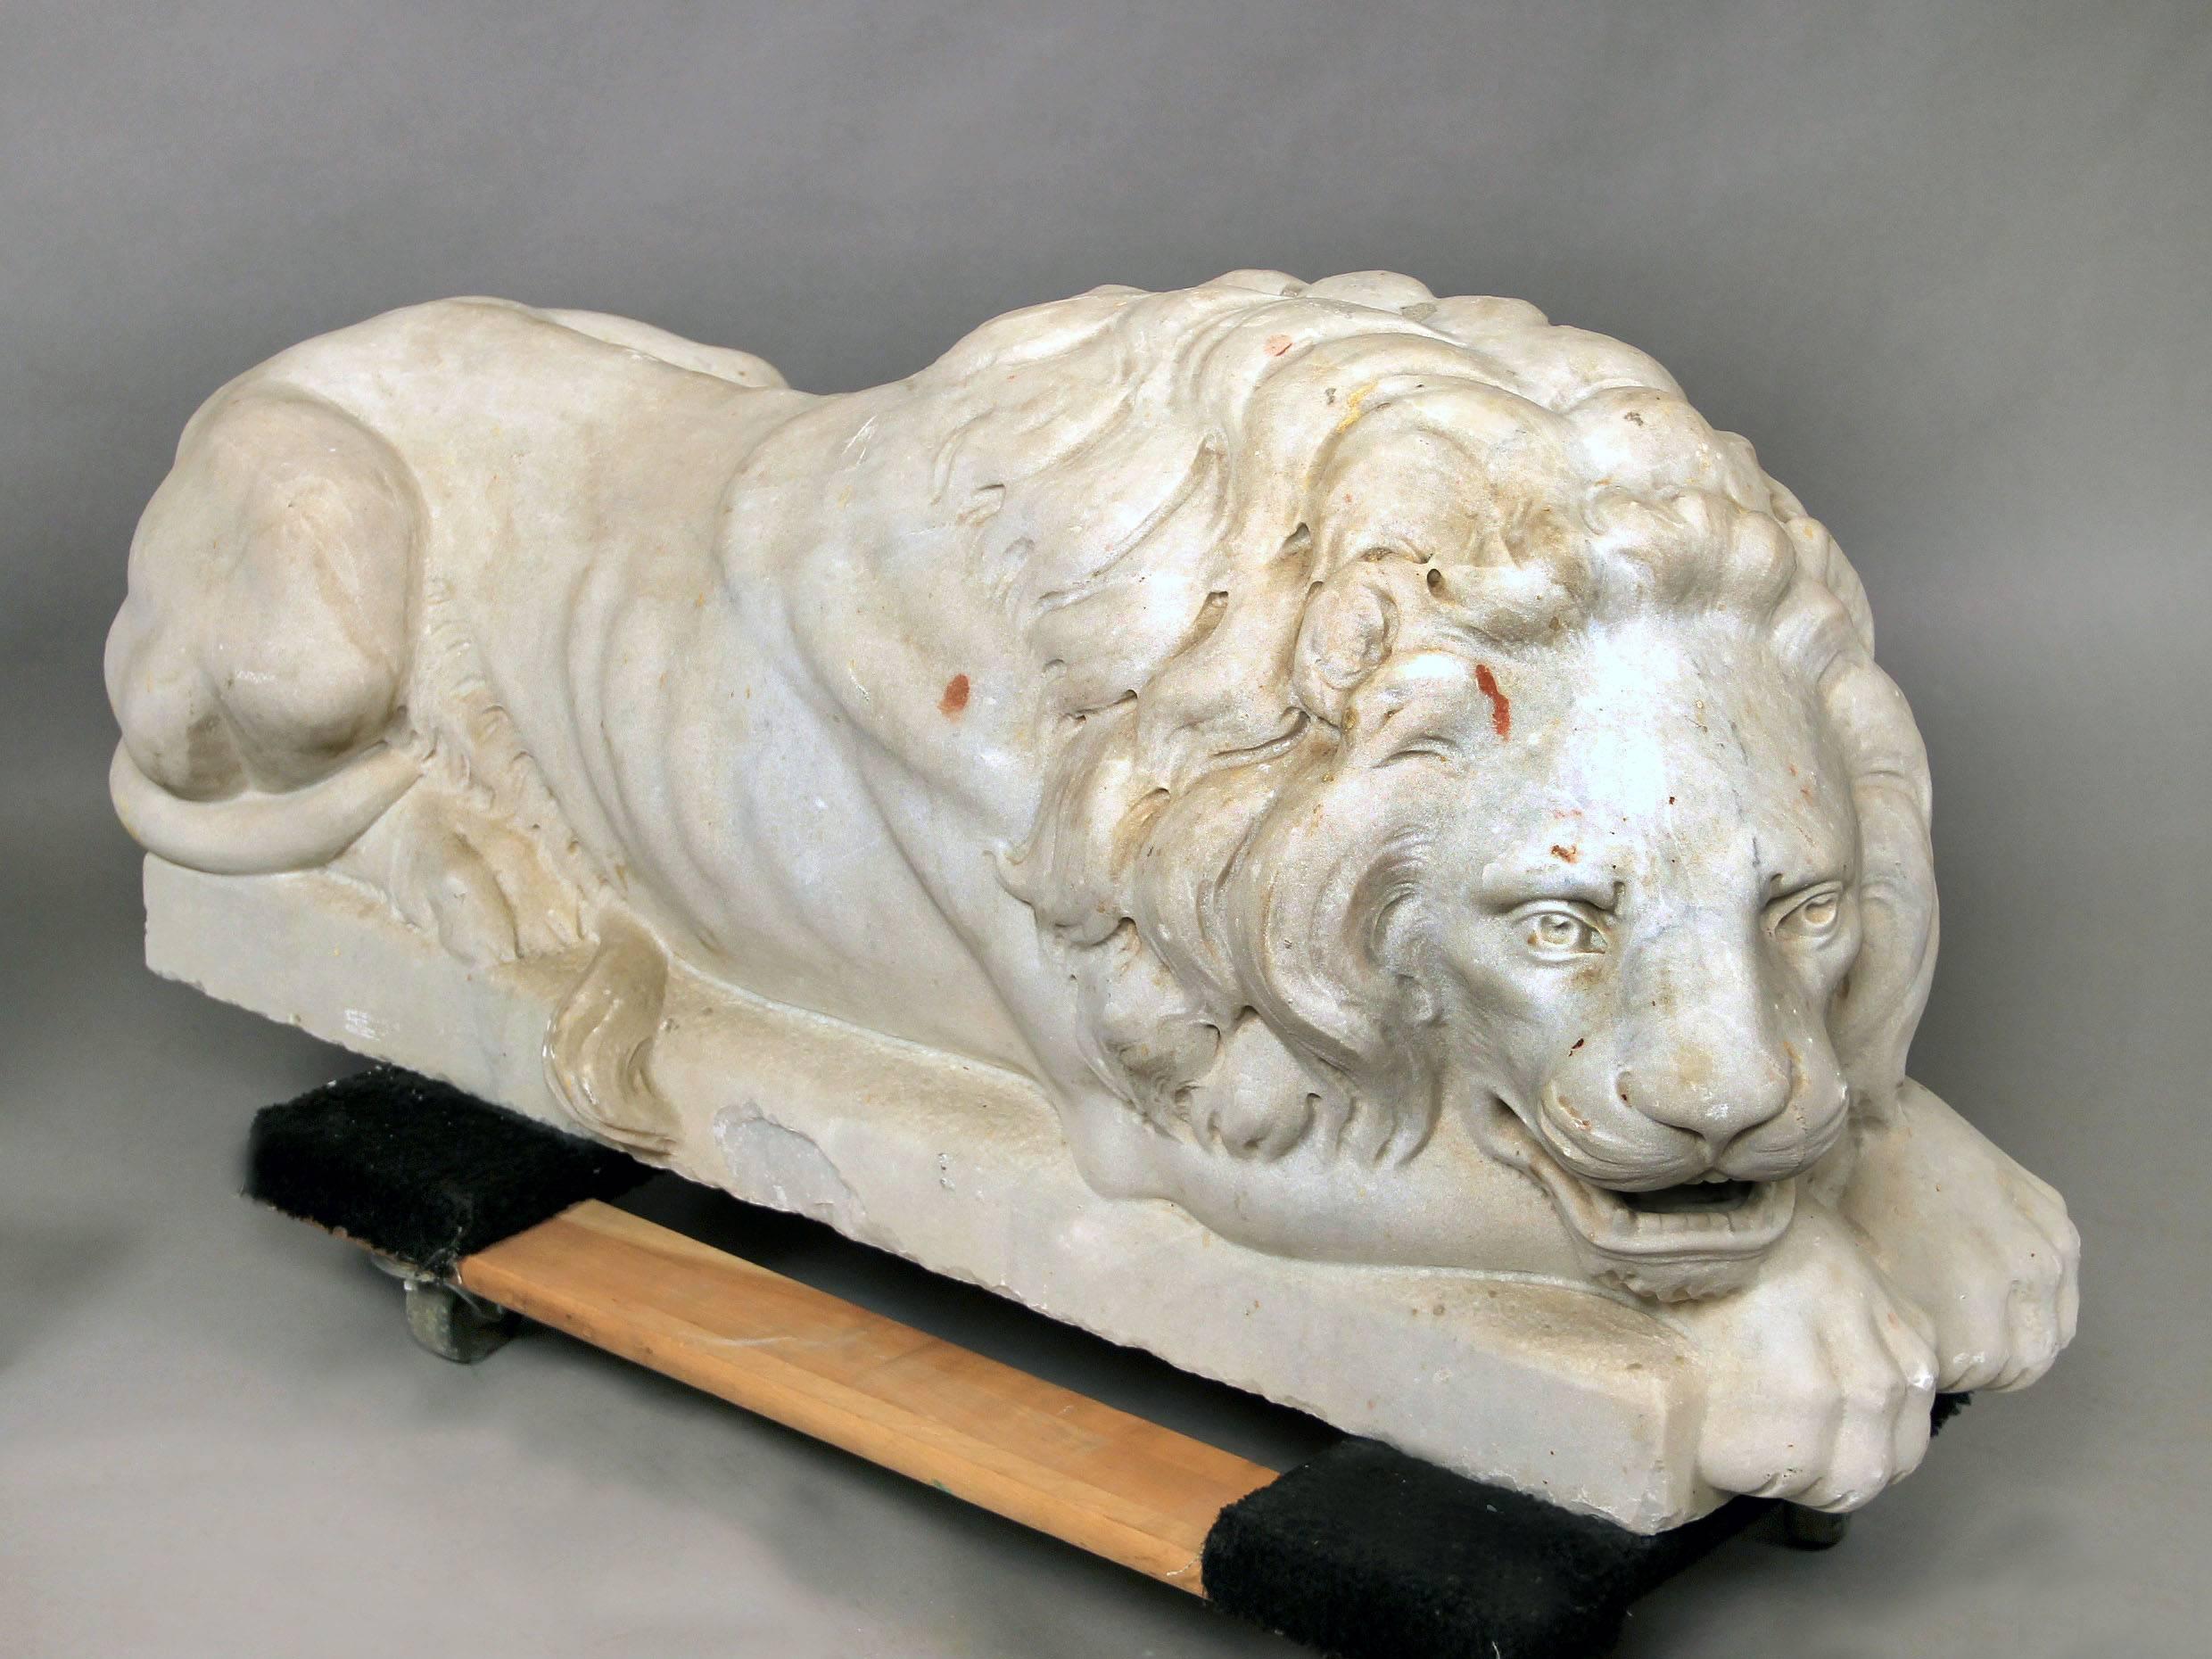 A nice pair of early 20th century large white marble recumbent lions

After the very famous models by Antonio Canova (Italian, 1757-1822), made for the monumental tomb of Clement III at St. Peter's Basilica.